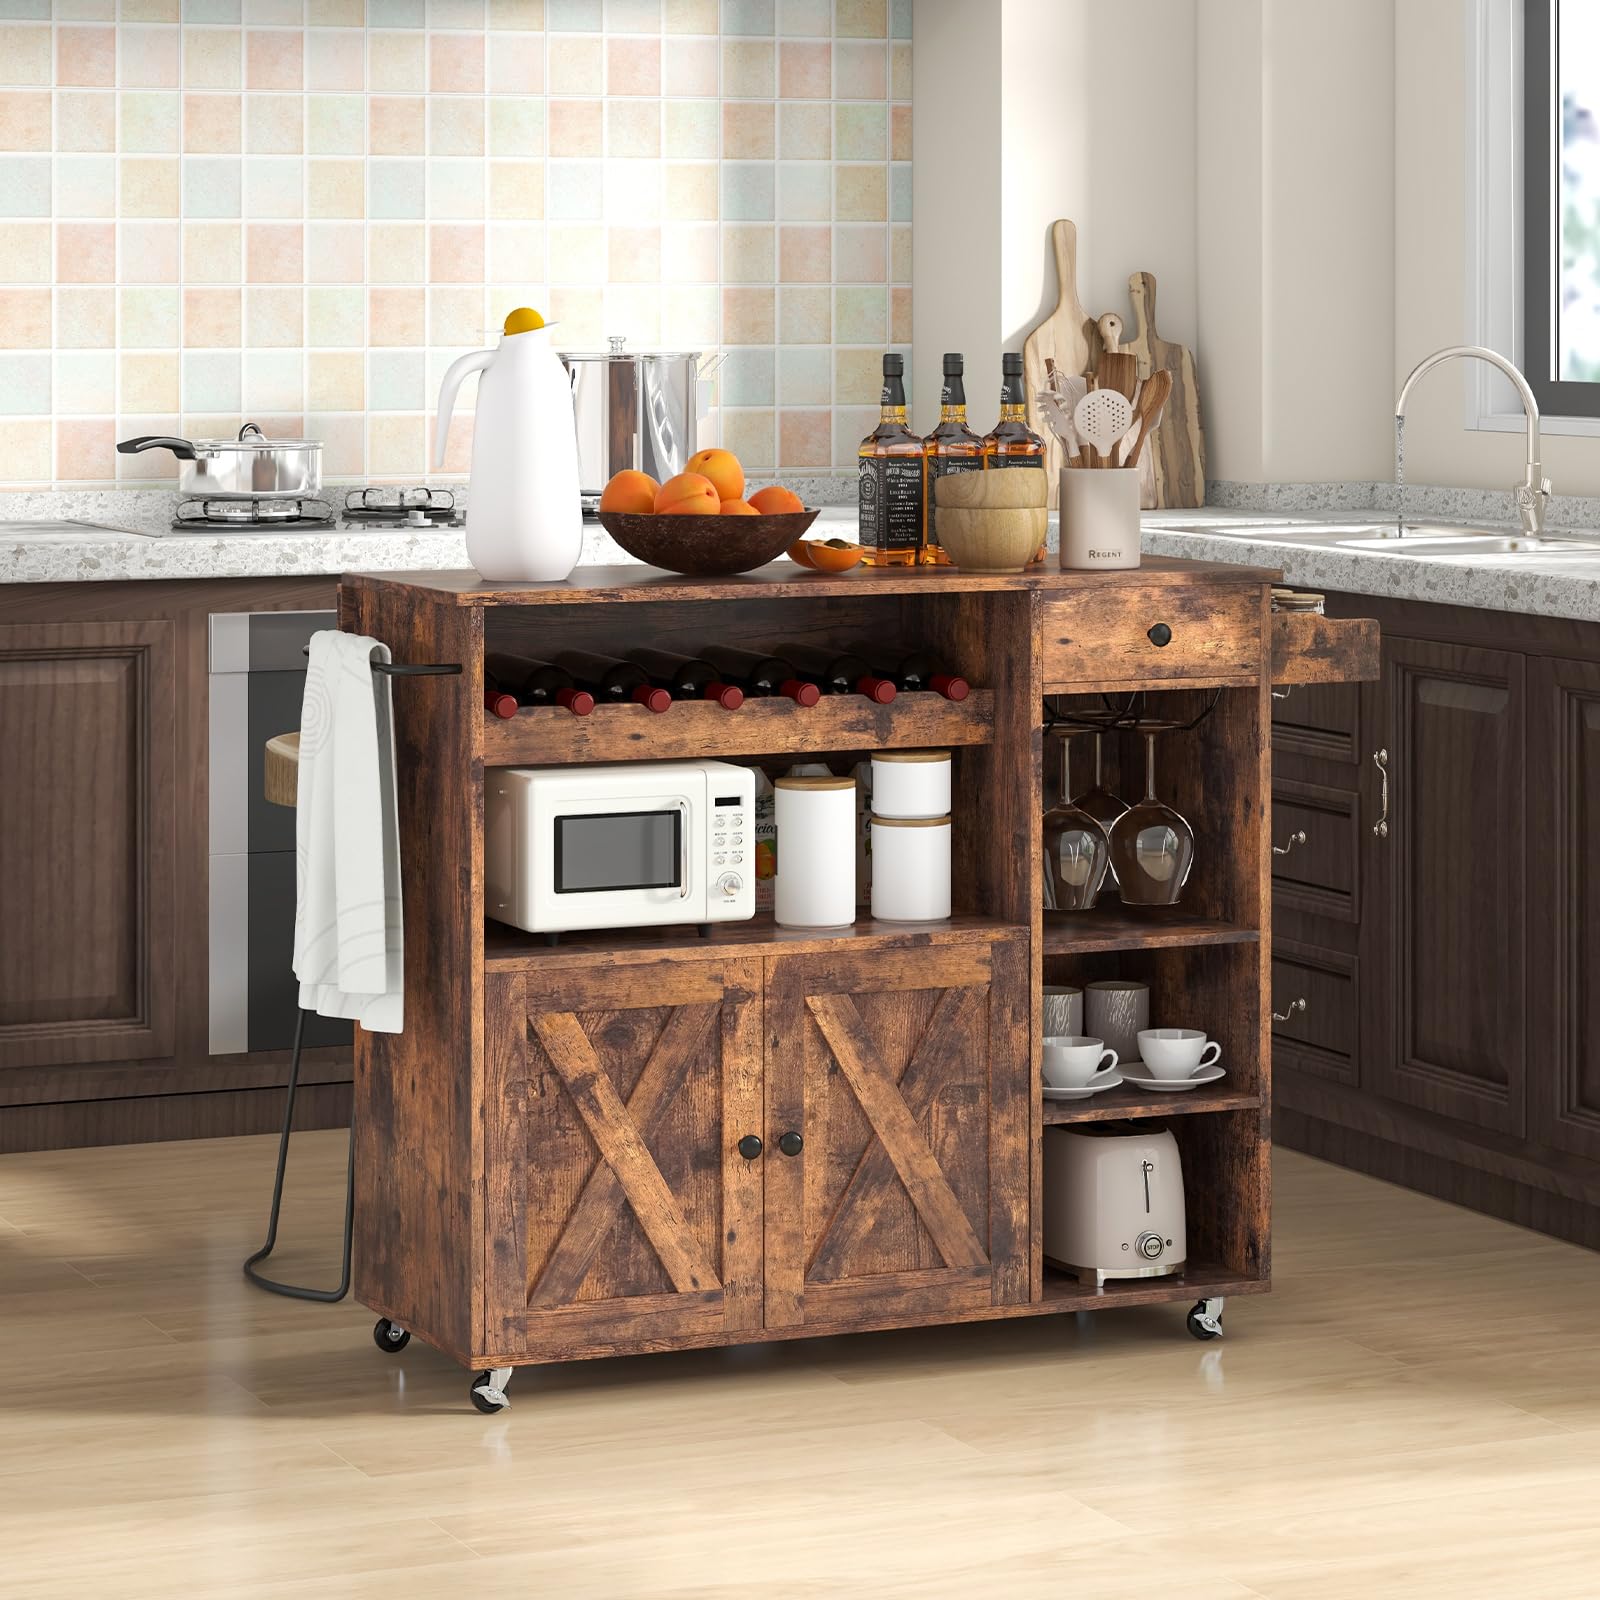 Giantex Kitchen Island with Drop Leaf - Mobile Kitchen Storage Cart with Cabinet